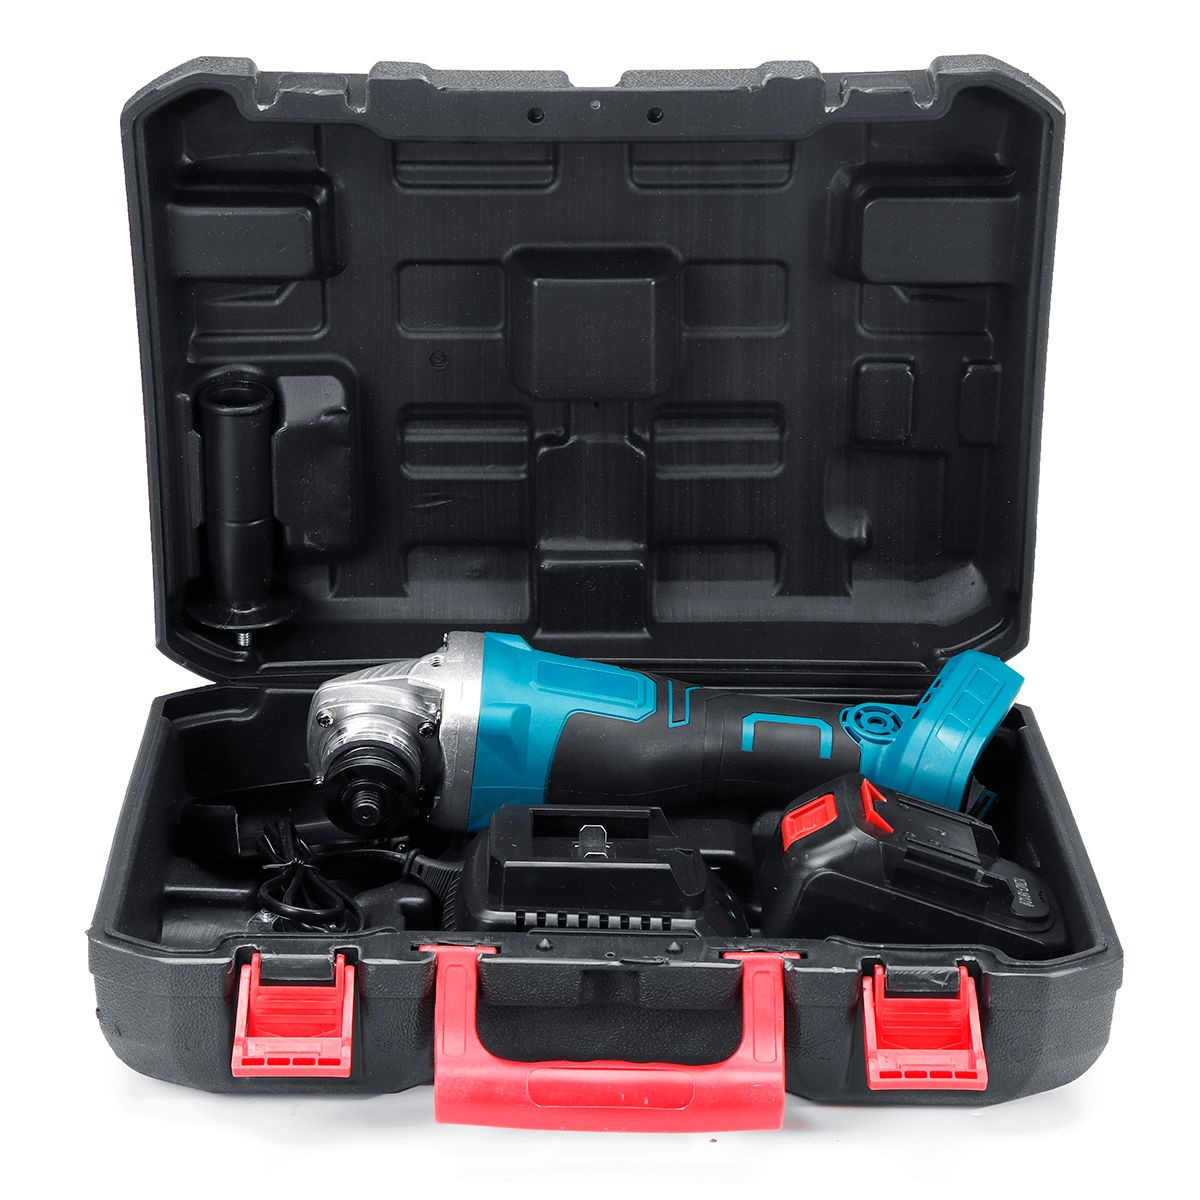 40V-128TV-29800mA-Electric-Angle-Grinder-Cordless-Grinding-Machine-Power-Cutting-Tool-Set-1518610